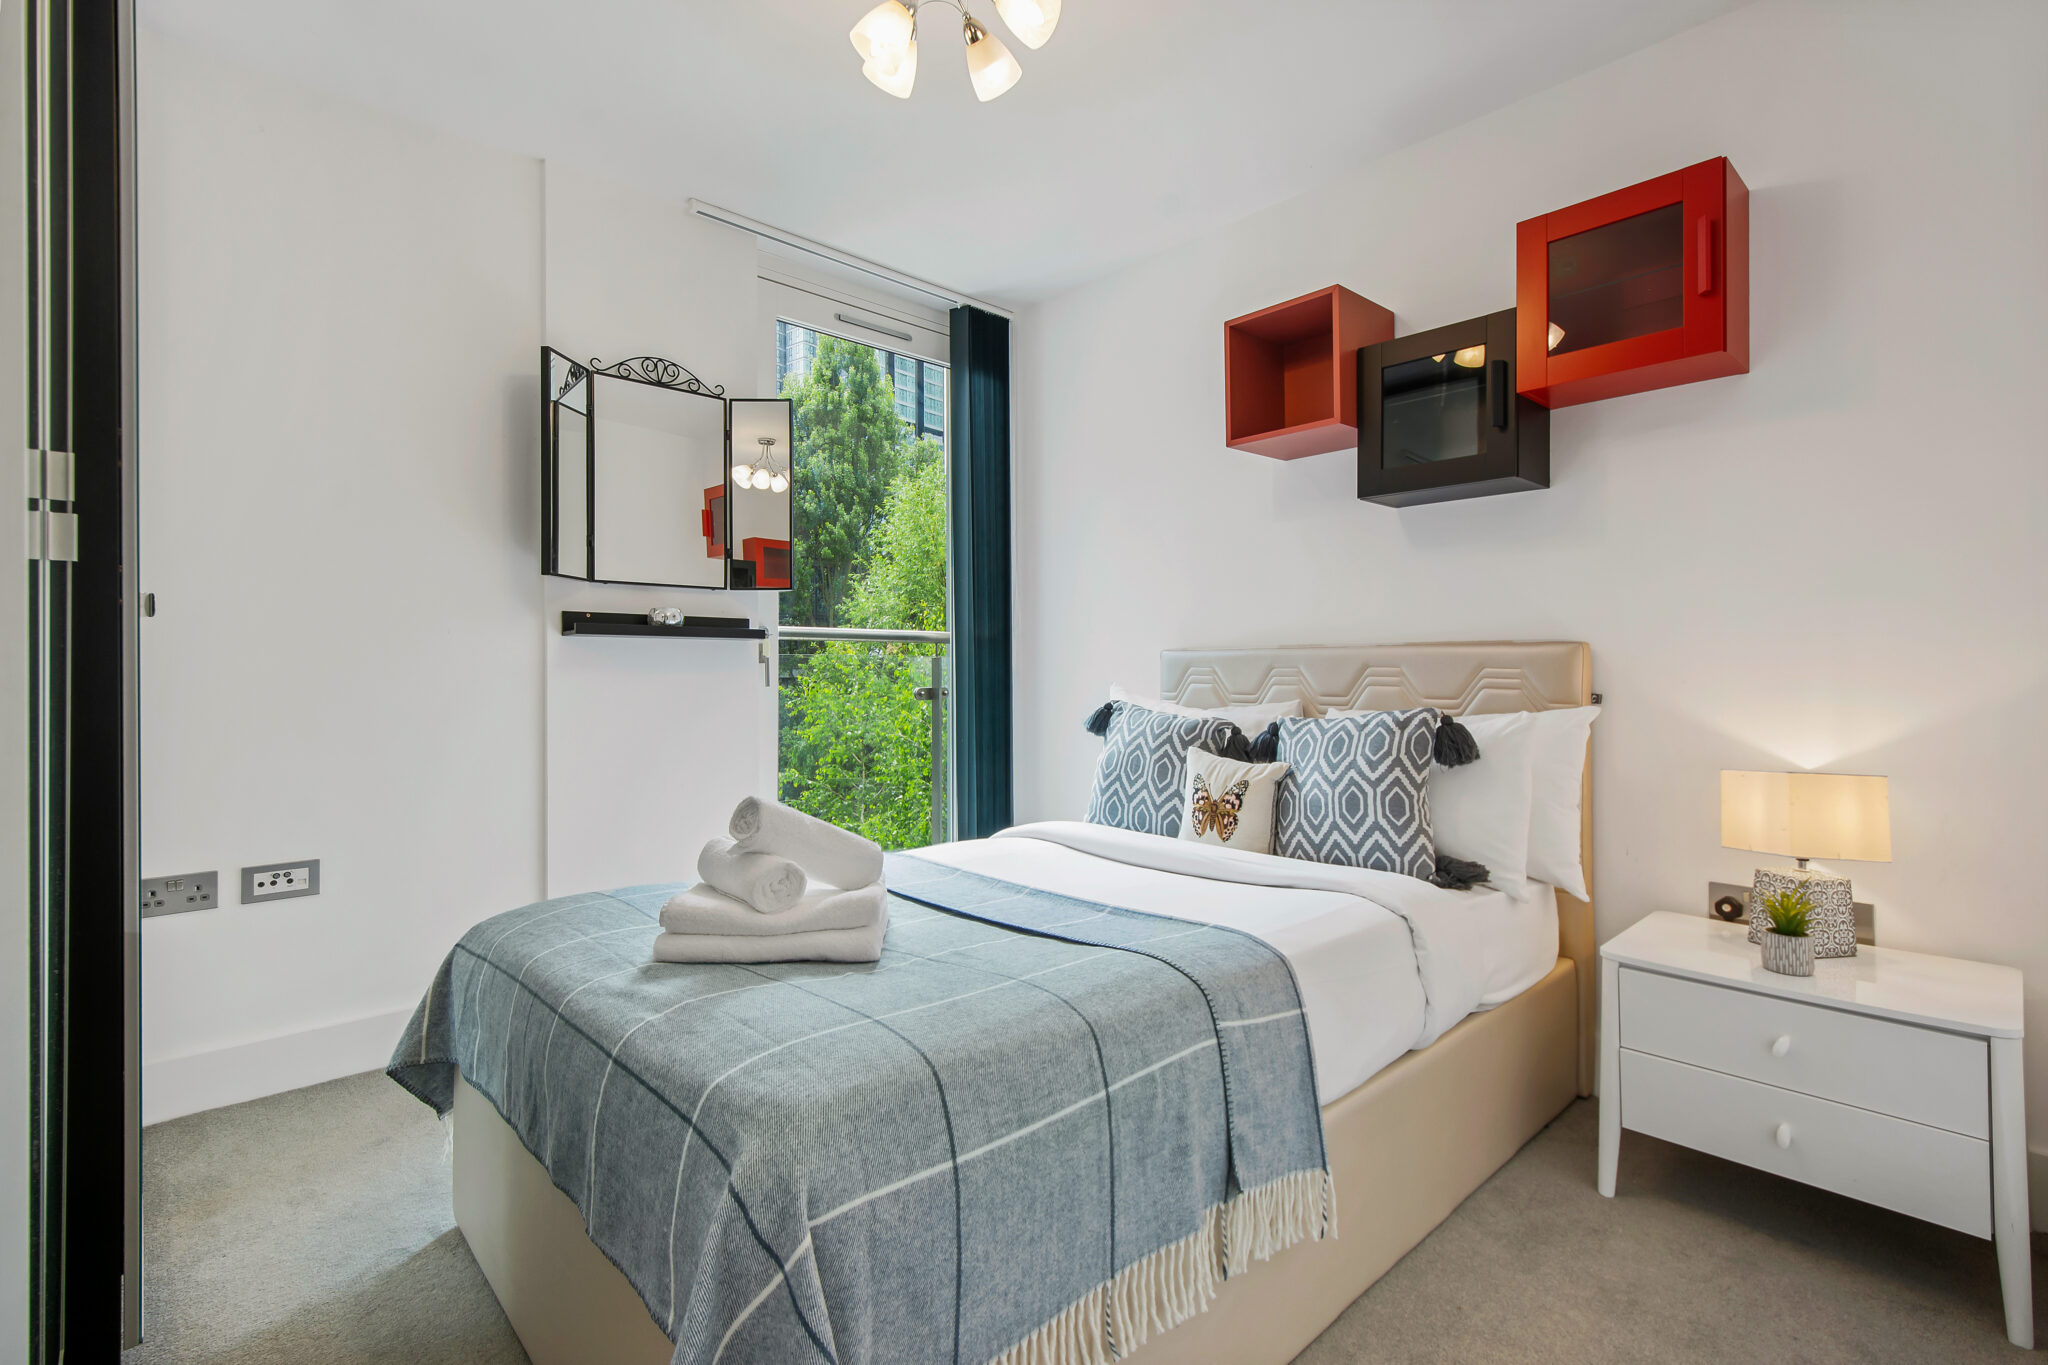 Discover-the-Perfect-Hotel-Alternative-with-our-Serviced-Apartments-at-Old-Street-Station.-Book-a-London-City-Centre-Location-at-Low-Cost!-Urban-Stay